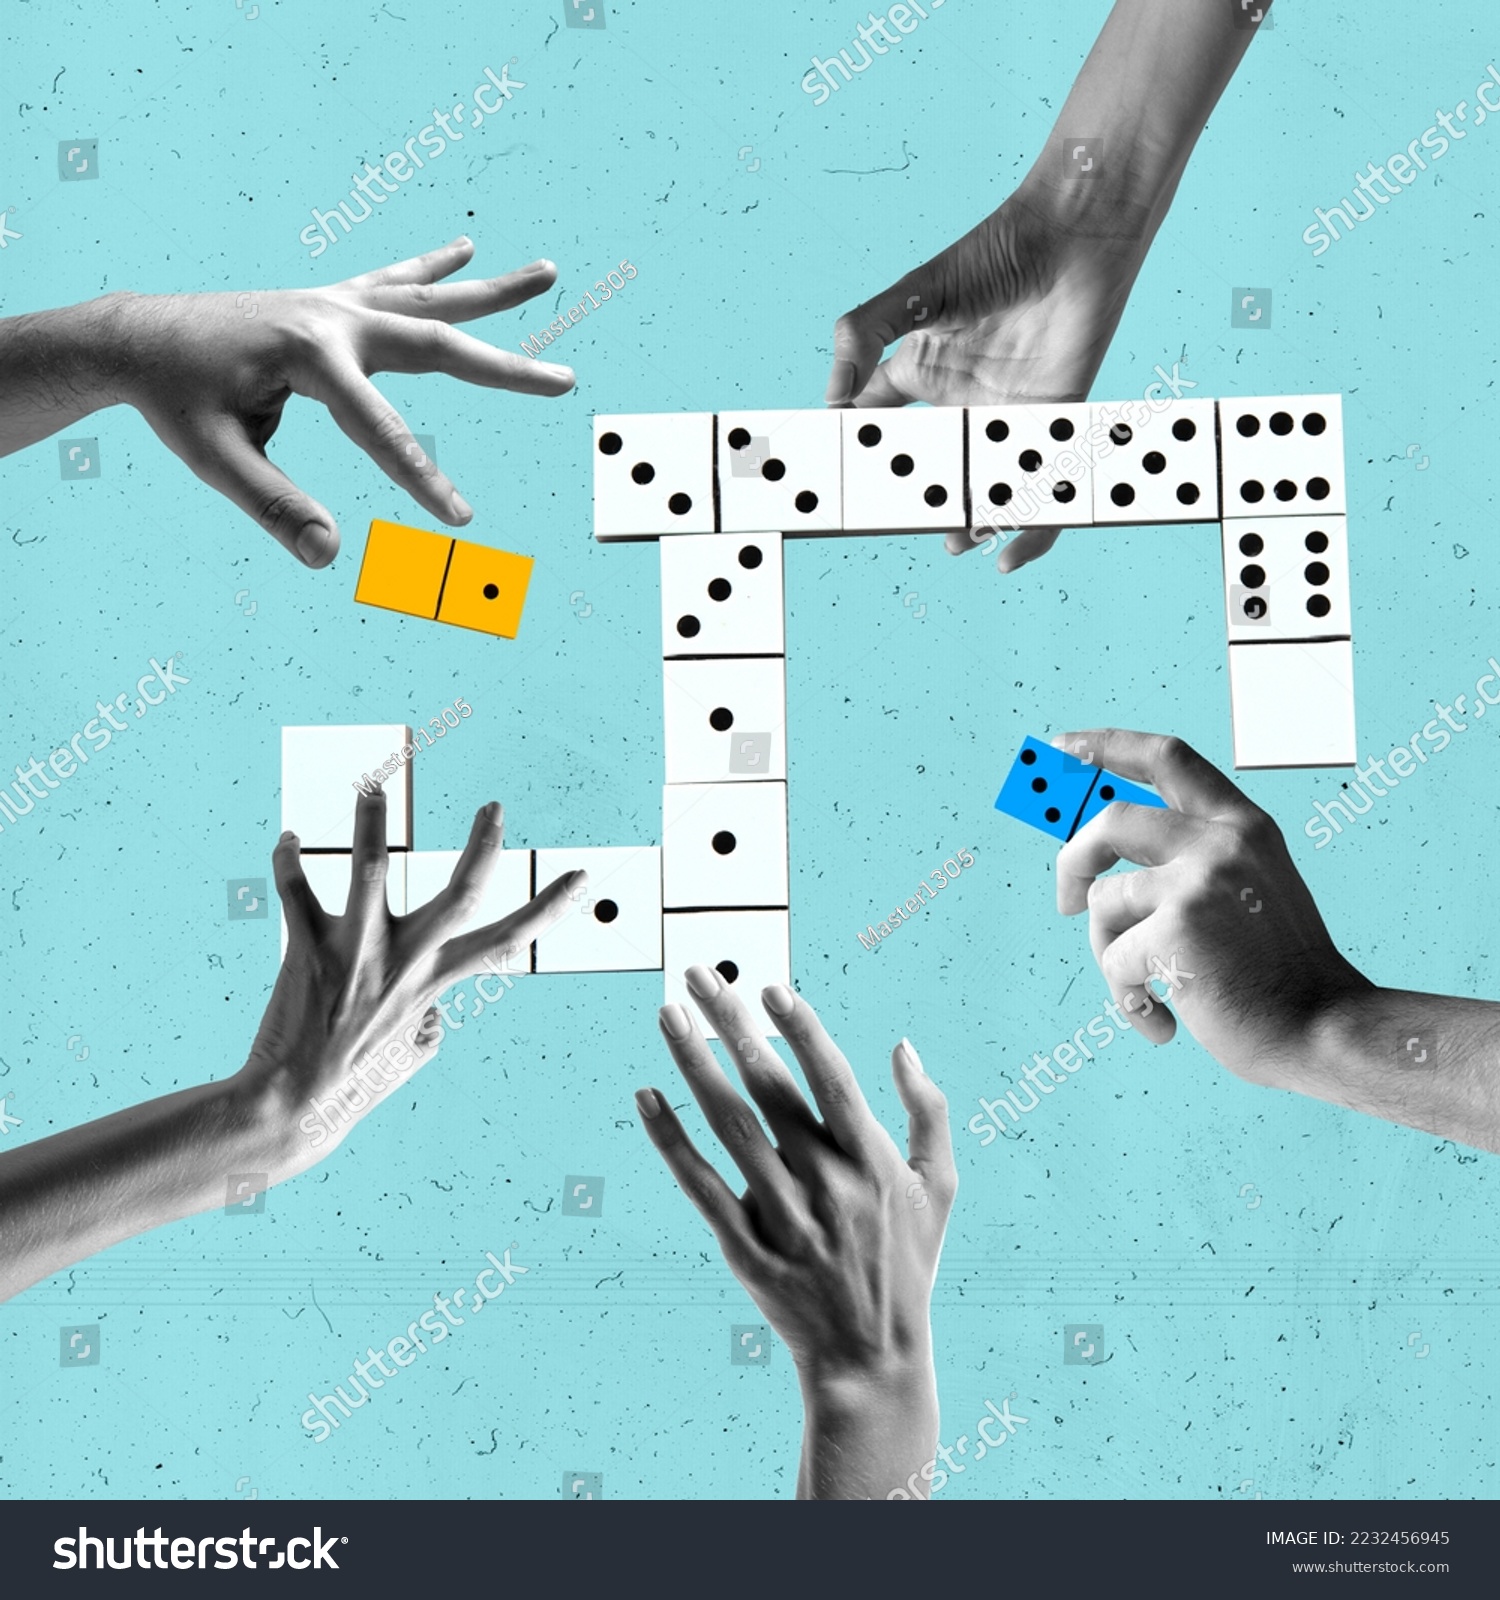 Contemporary art collage. Creative design. Human hands playing domino, making figure to win. Gaming, betting. Concept of game, hobby, leisure time, intellectual game strategy, creativity #2232456945